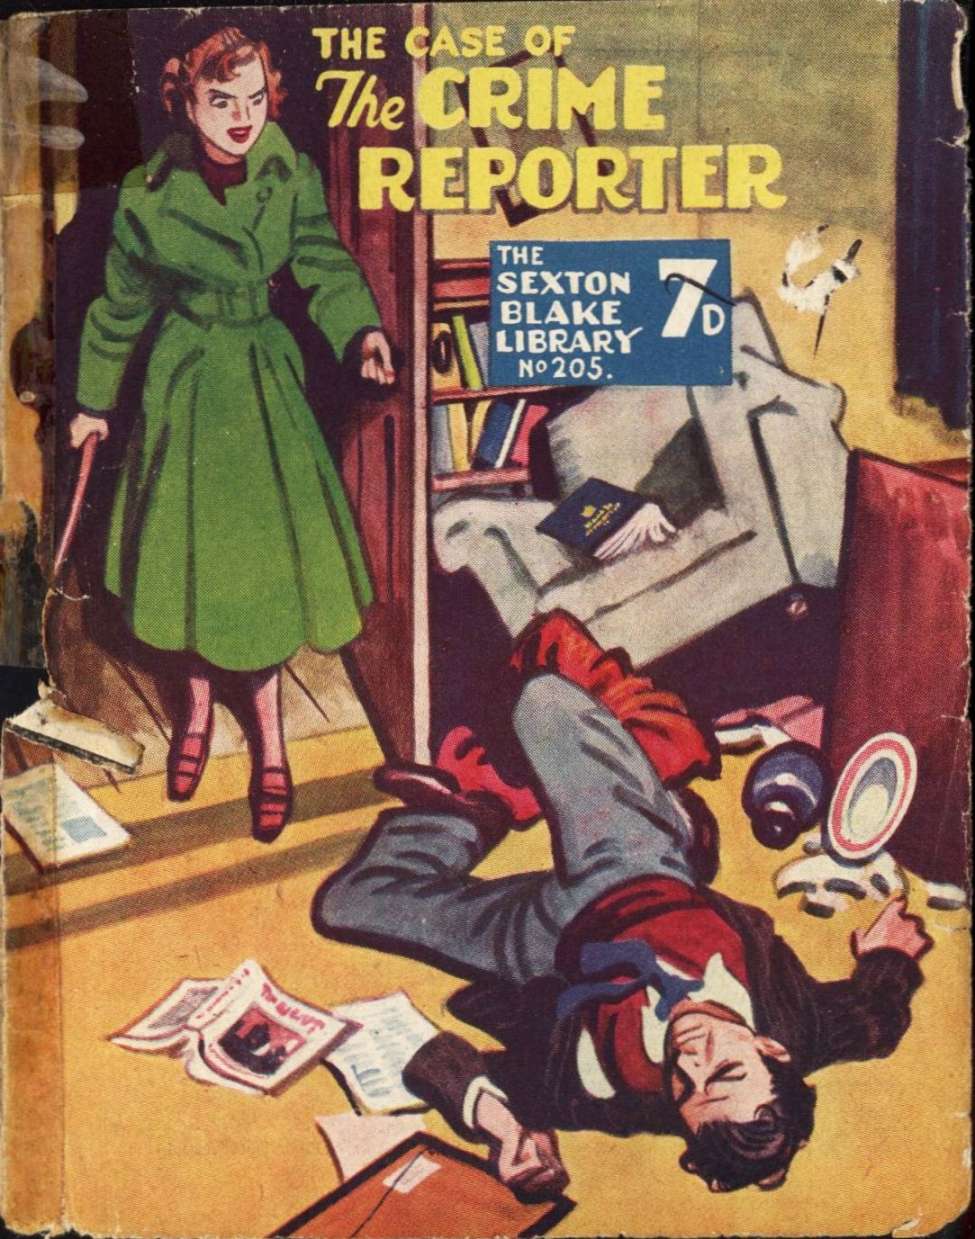 Comic Book Cover For Sexton Blake Library S3 205 - The Case of the Crime Reporter